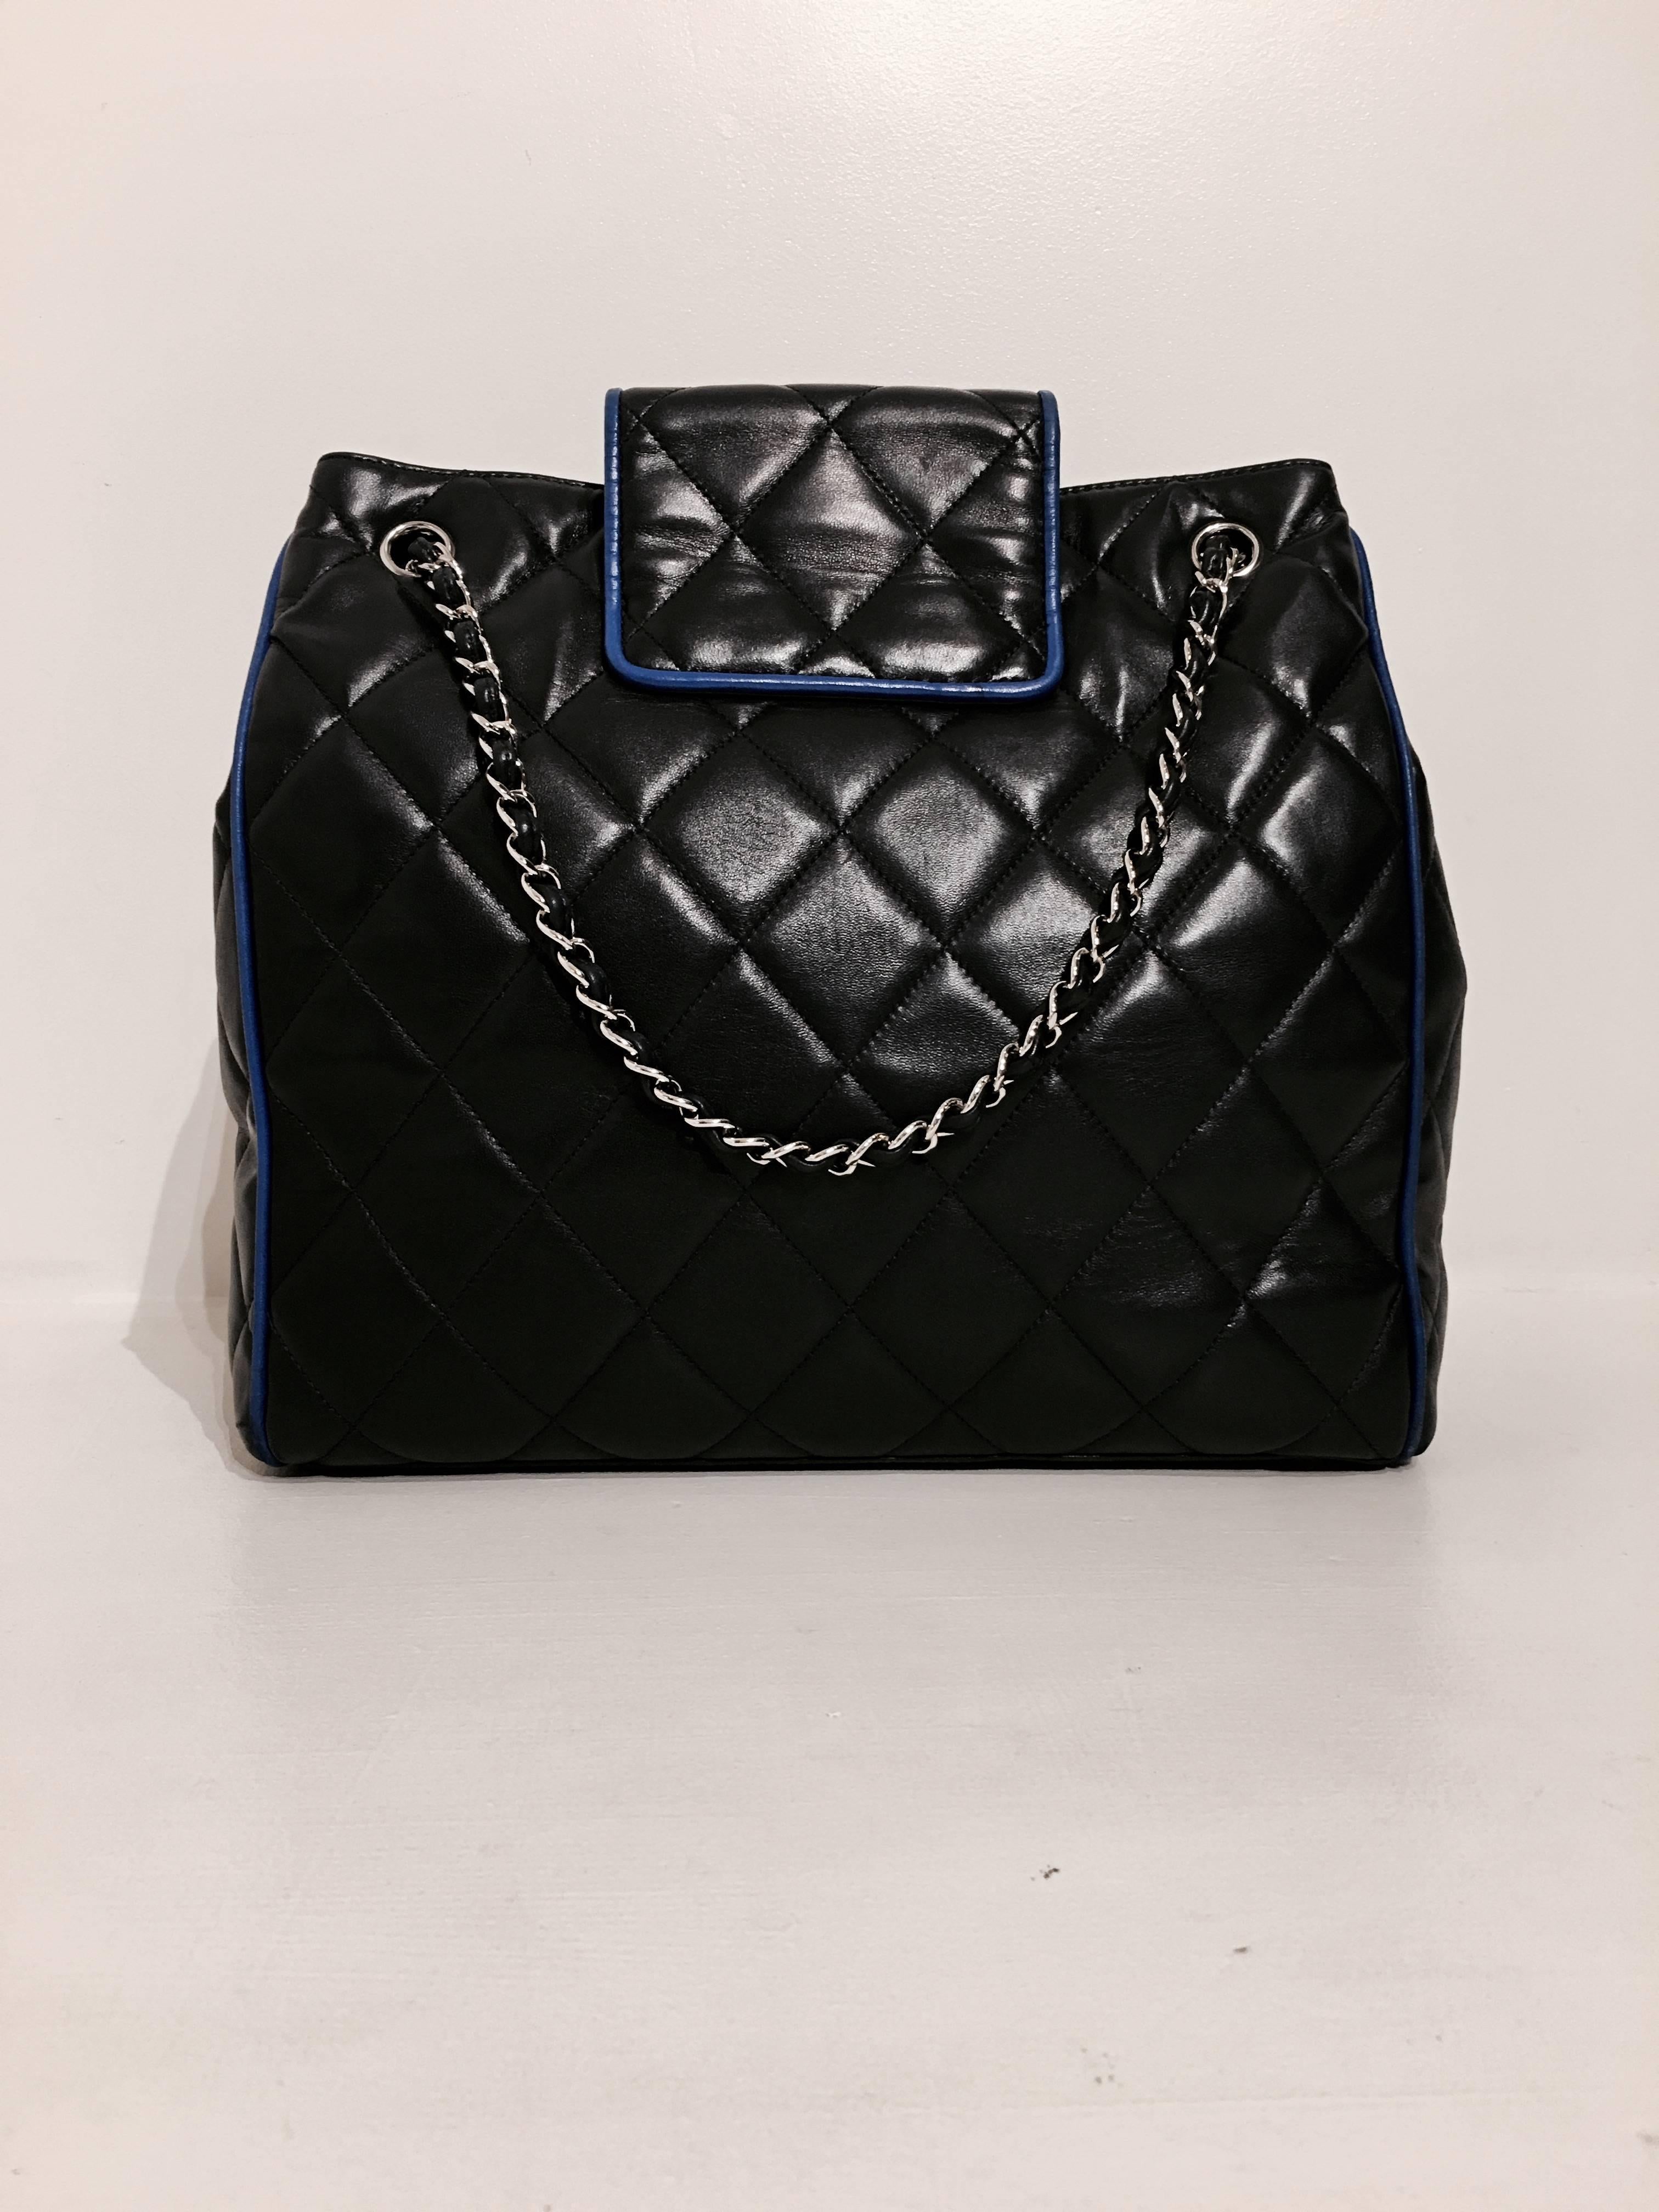 Chanel navy quilted leather bag with royal blue piping. The bag has adjustable straps in silver chain and navy leather, and the flap-closure features the double CC logo in royal blue leather